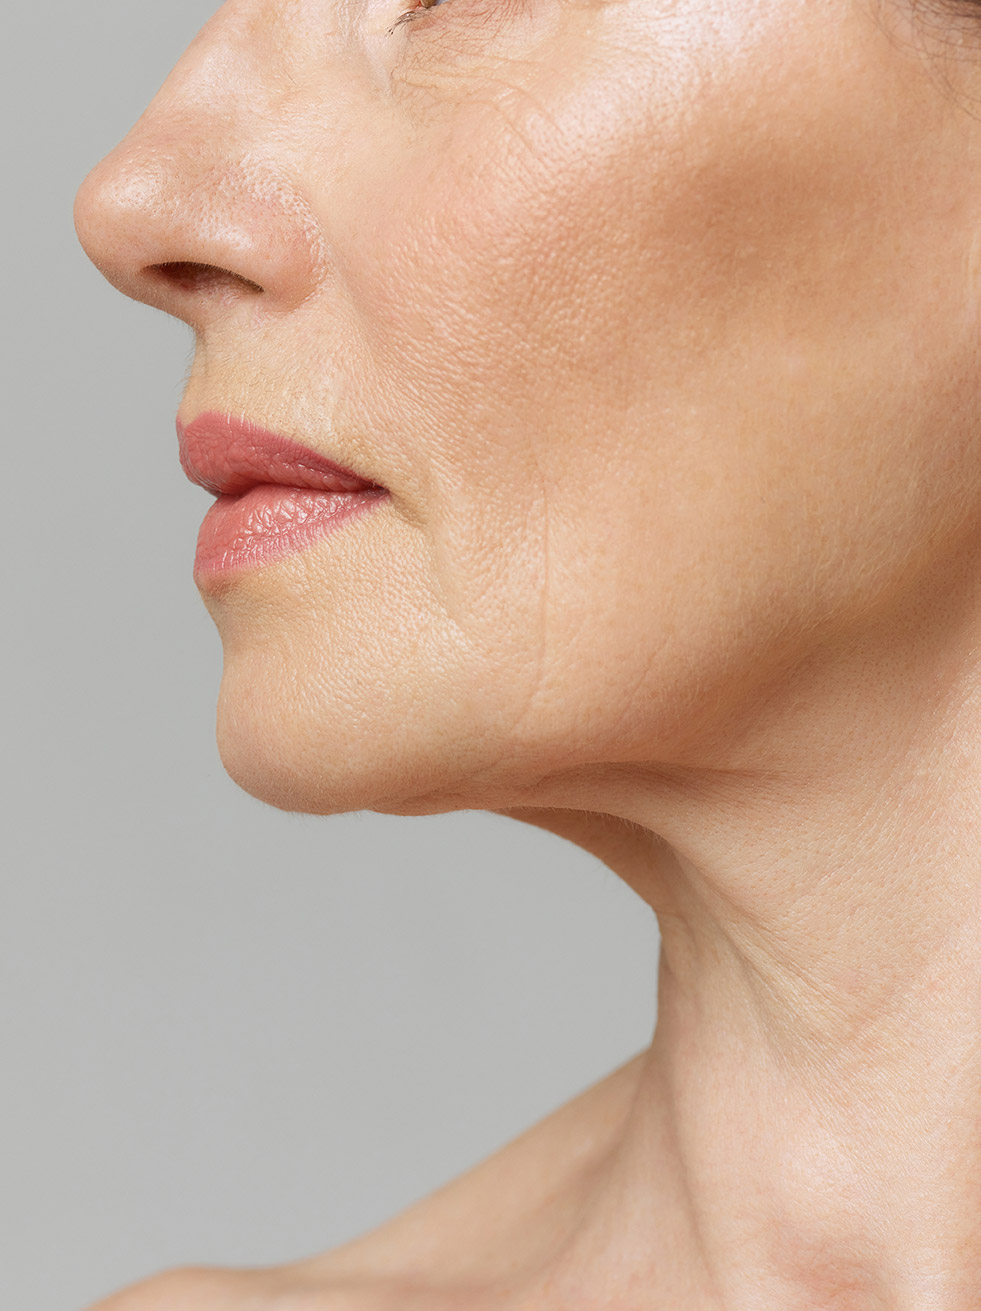 Cropped profile portrait with lips and chin neckline of middle-aged woman over grey studio background.